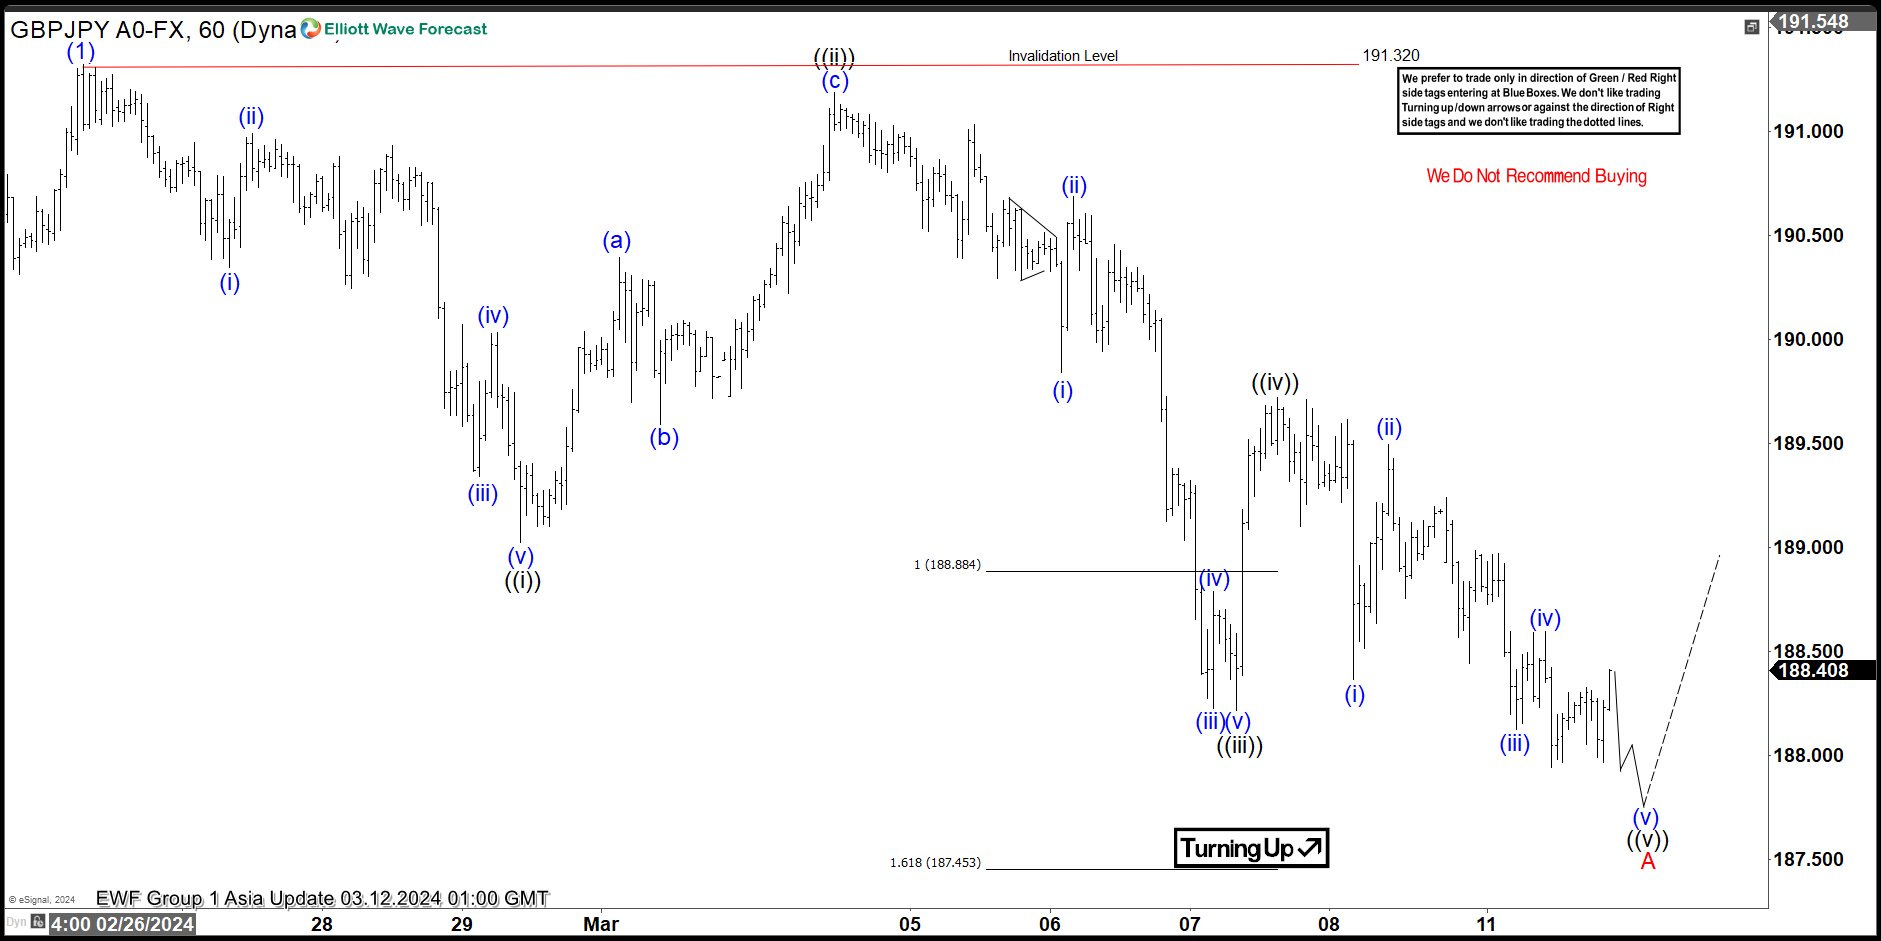 GBPJPY Elliott Wave View: 5 Swings Down Suggests Correction To Extend